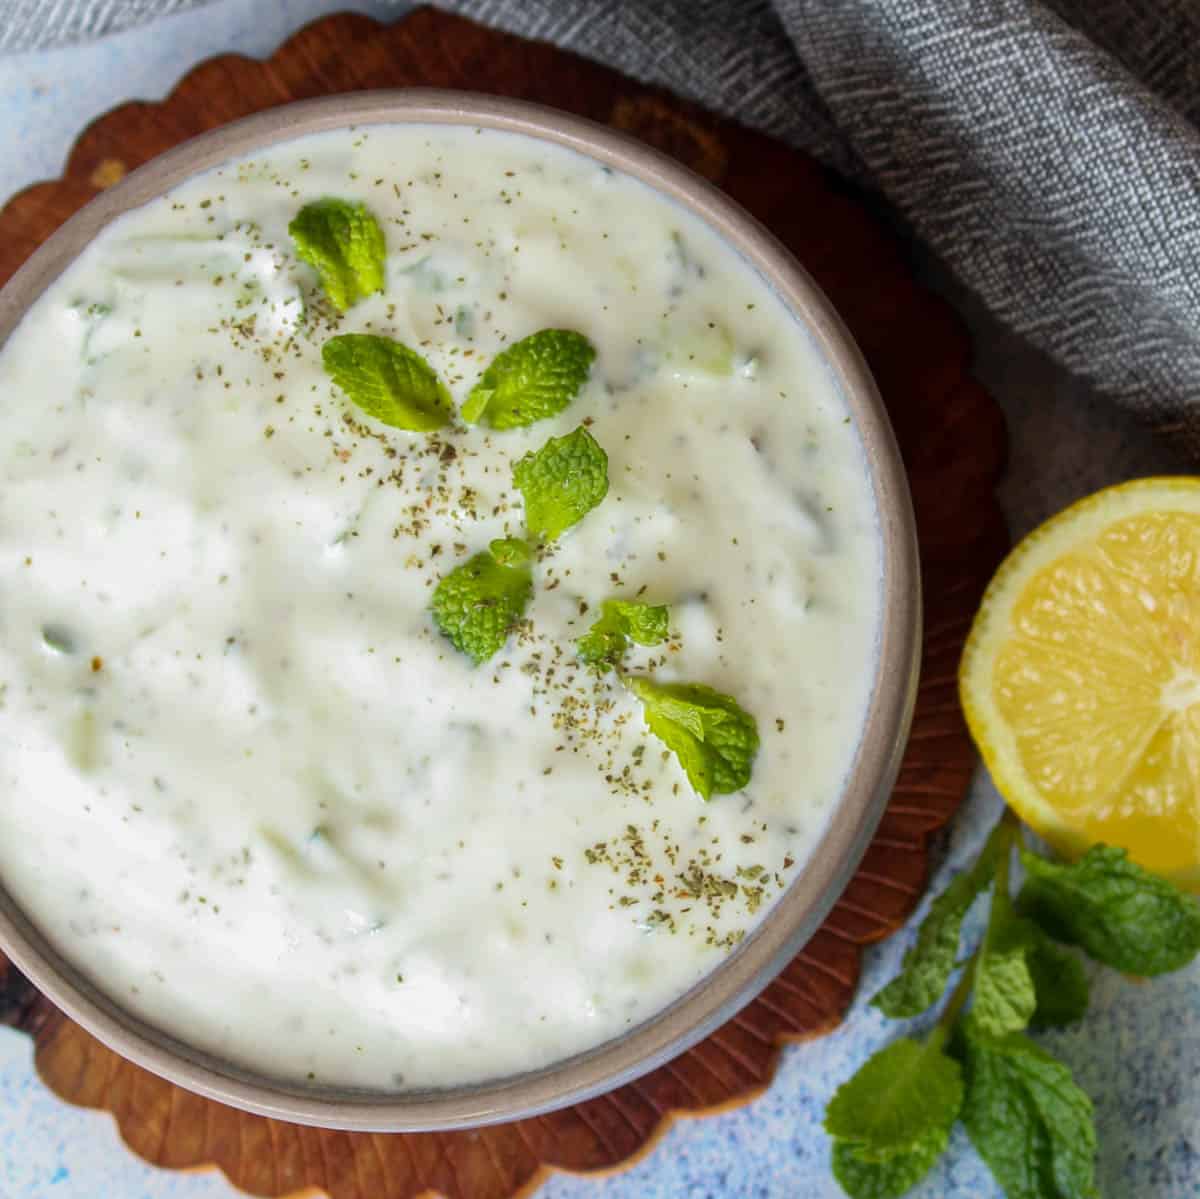 a bowl with cacik, Turkish yogurt dip, served with fresh mint leaves and slice of lemon